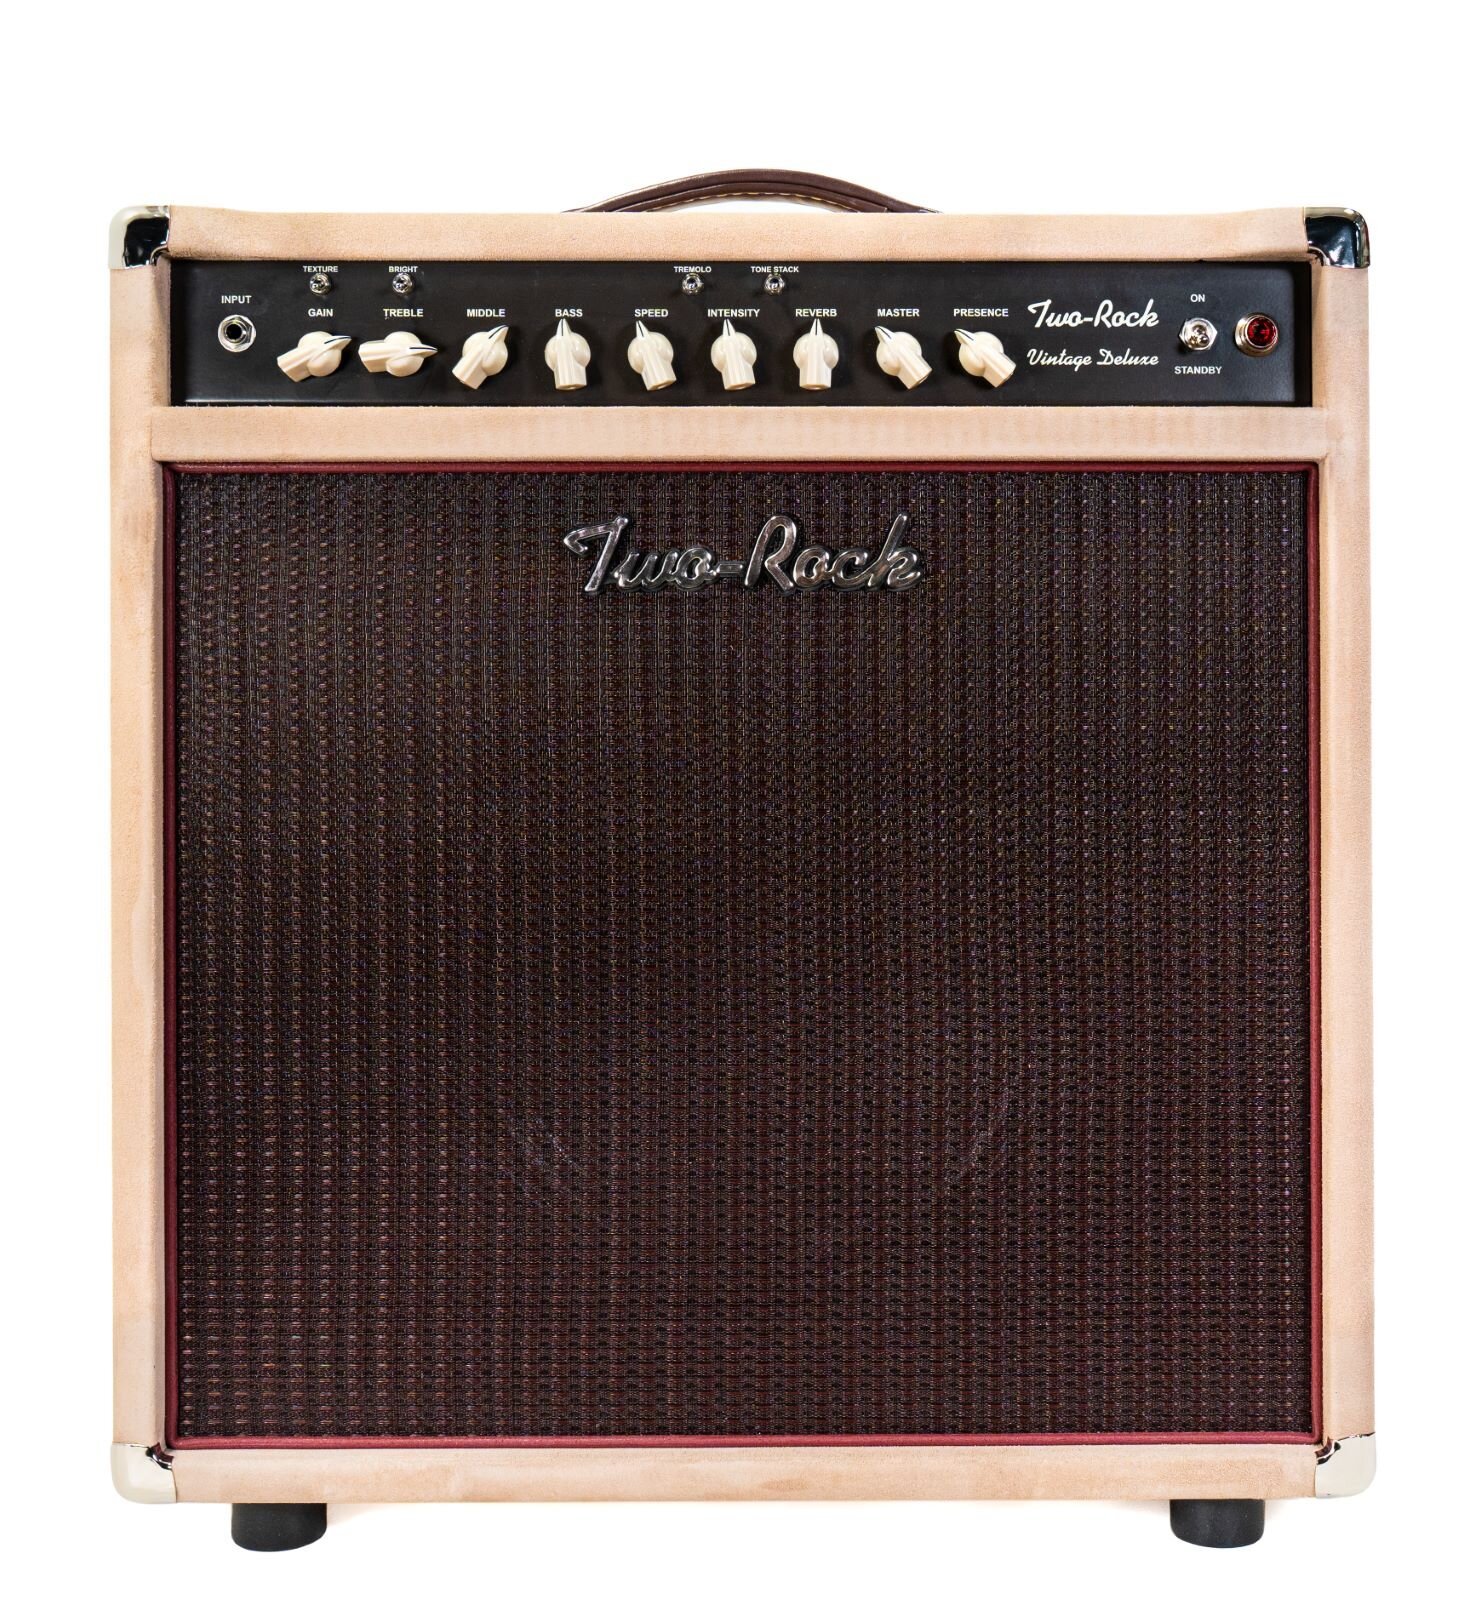 Two-Rock Vintage Deluxe, 35 watt combo, brown chassis, dogwood suede, oxblood cloth, TR12 speaker : photo 1